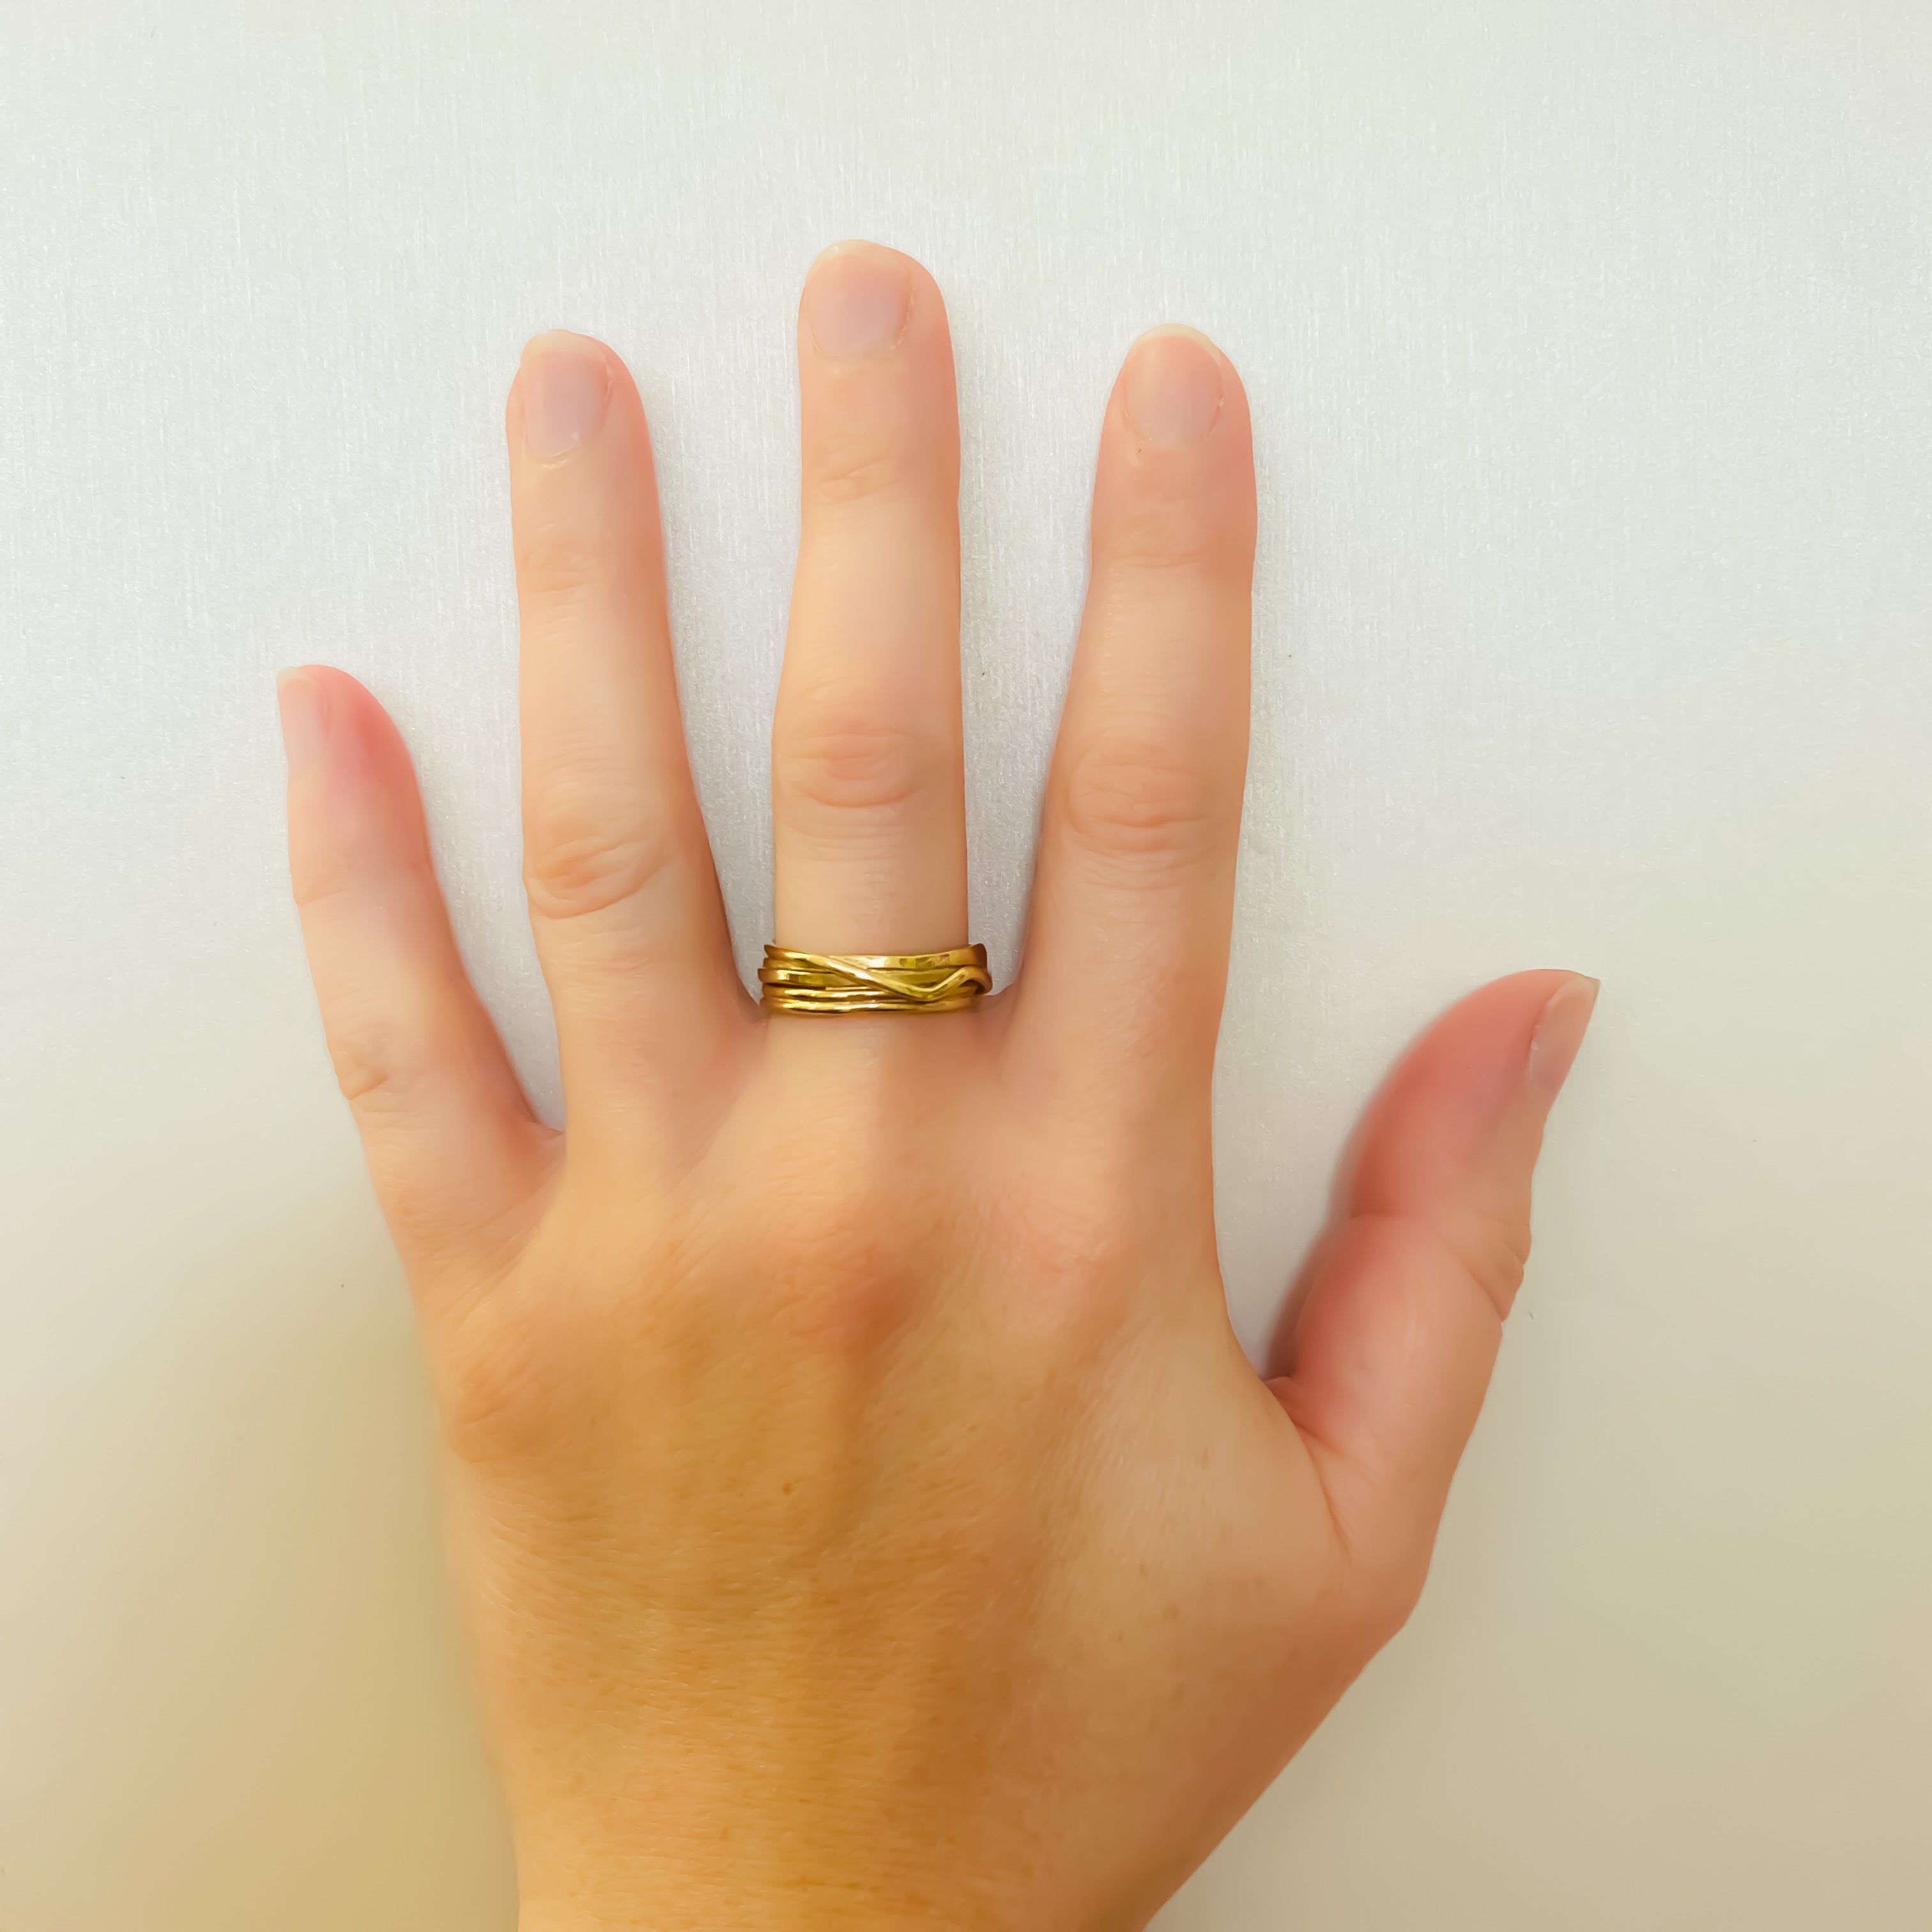 Gold Wrapped Wedding Ring